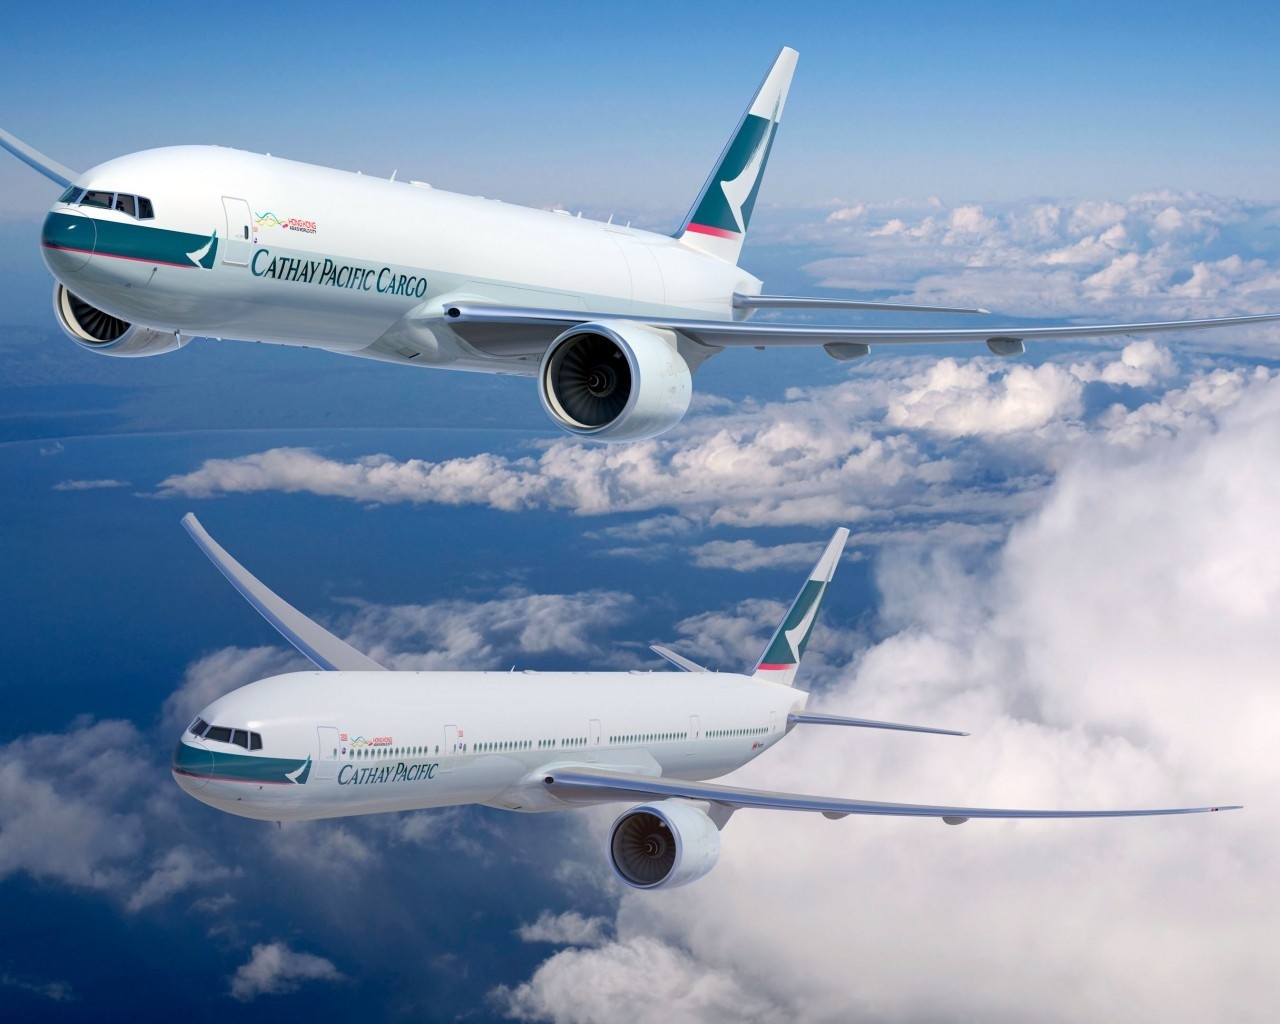 Cathay Pacific Boeing 777 for 1280 x 1024 resolution